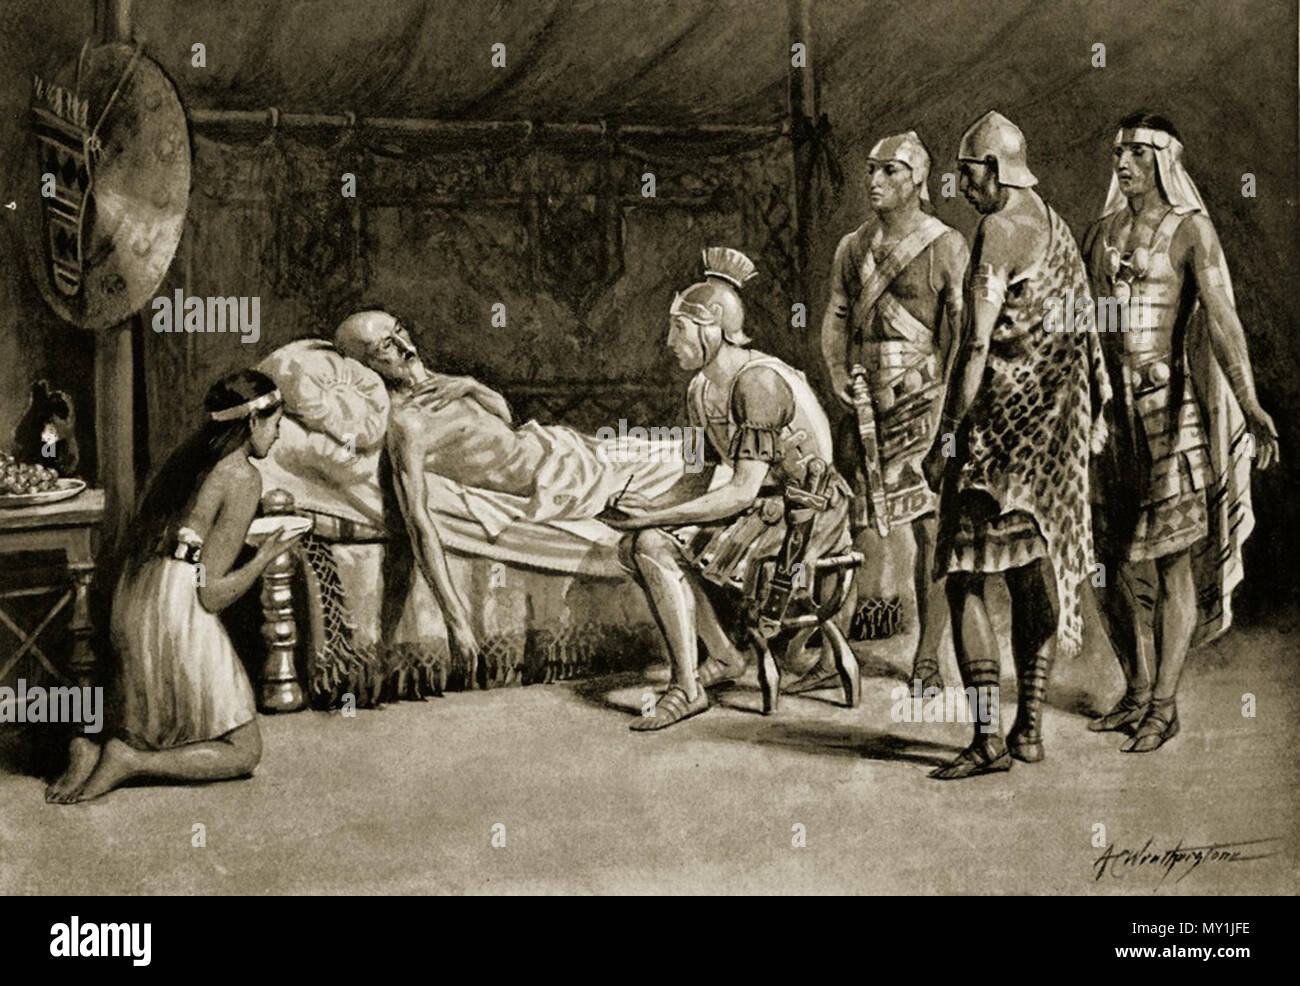 . Scipio at the deathbed of Masinissa (C20) . Masinissa, the king of Numidia (c.240 – 148 B.C), died in 148 B.C., still at odds with the Roman governement; He honoured Scipio Aemilianus (185 – 129 BC), who was present at his death, by asking him to divide the kingdom between Masinissa's three sons . C20 479 Scipio at the deathbed of Masinissa (C20) Stock Photo